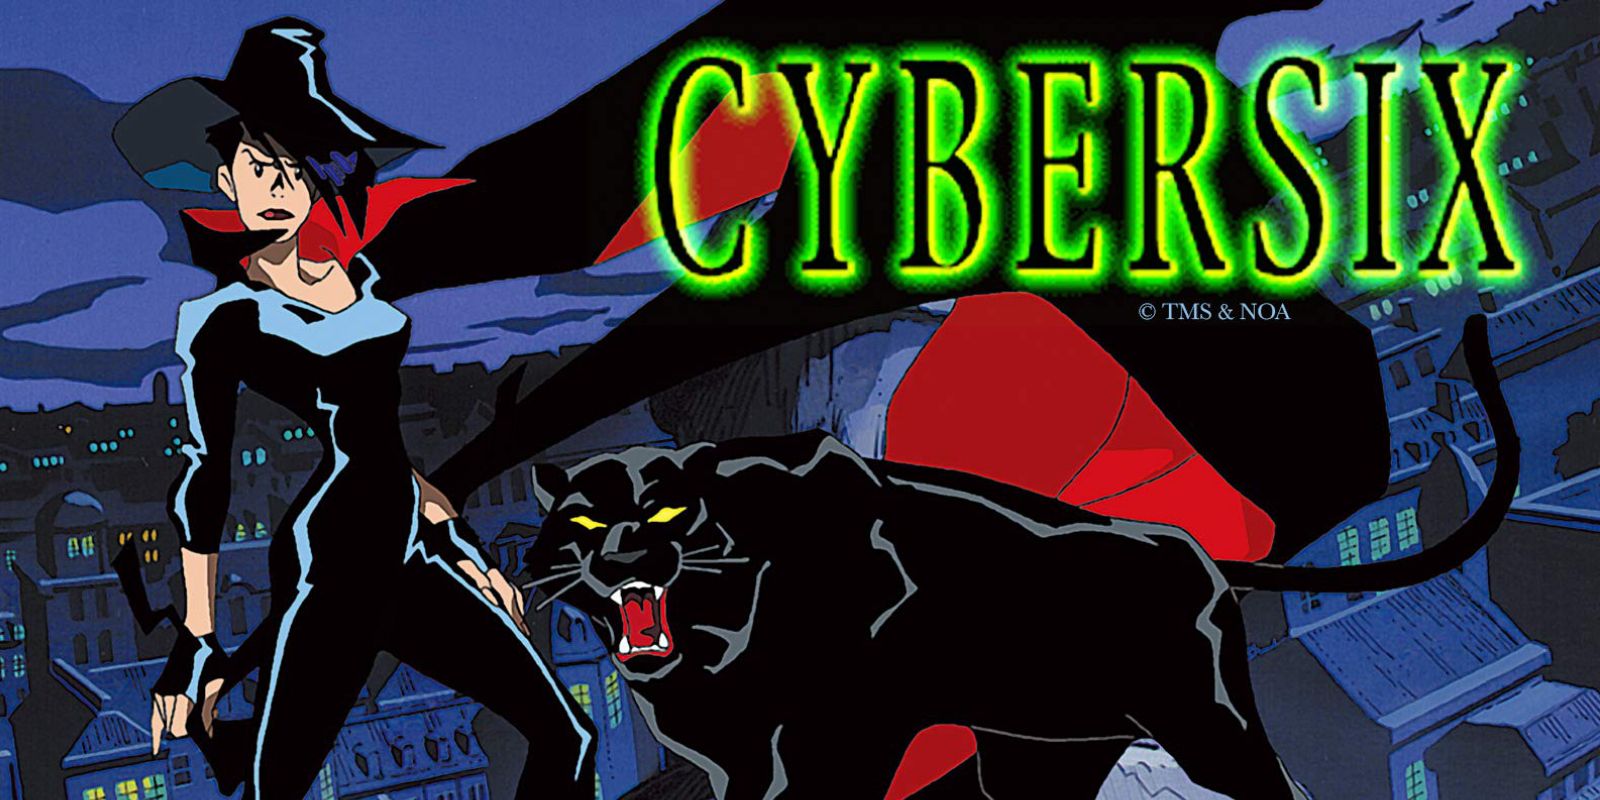 Cybersix and Data-7 from the animated series